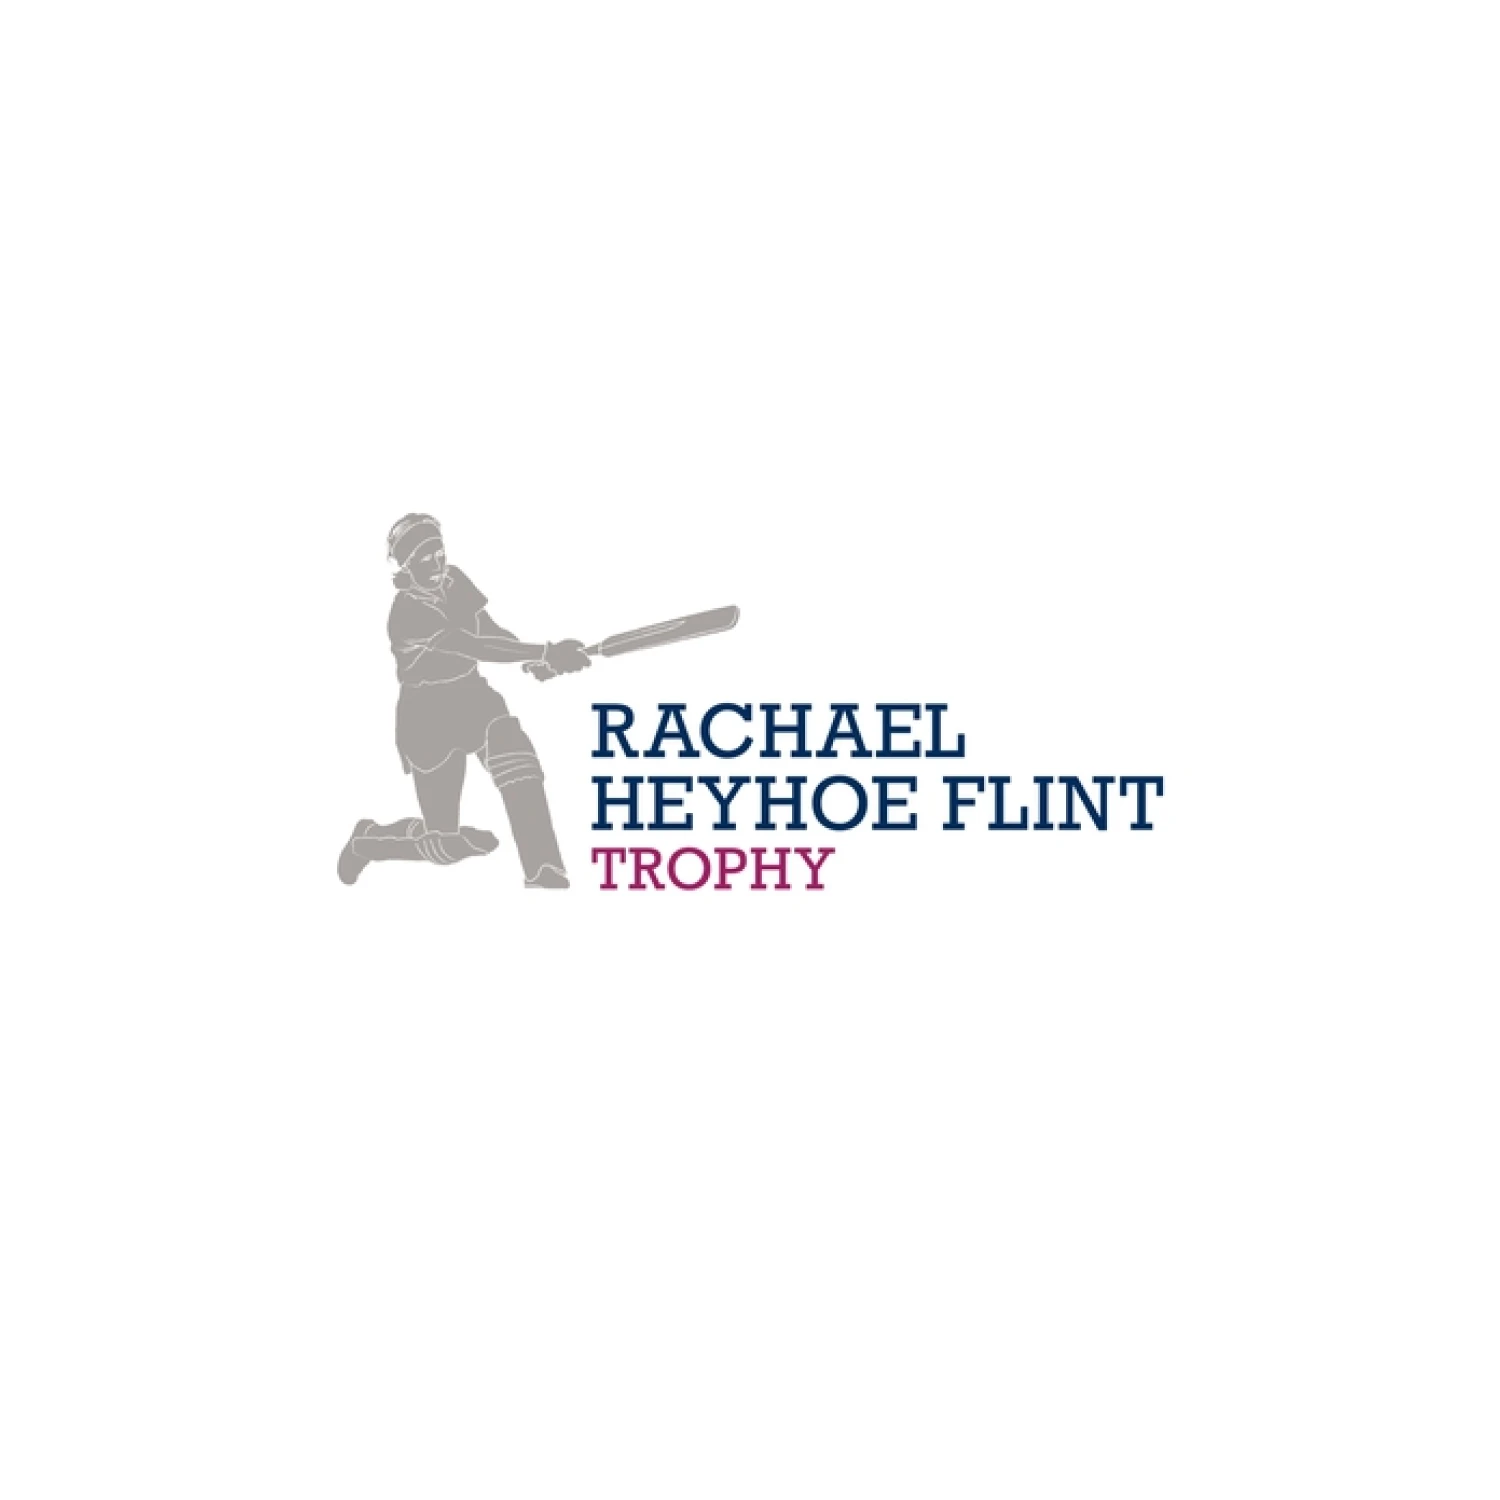 Find more about the history and teams of the Rachael Heyhoe Flint Trophy.